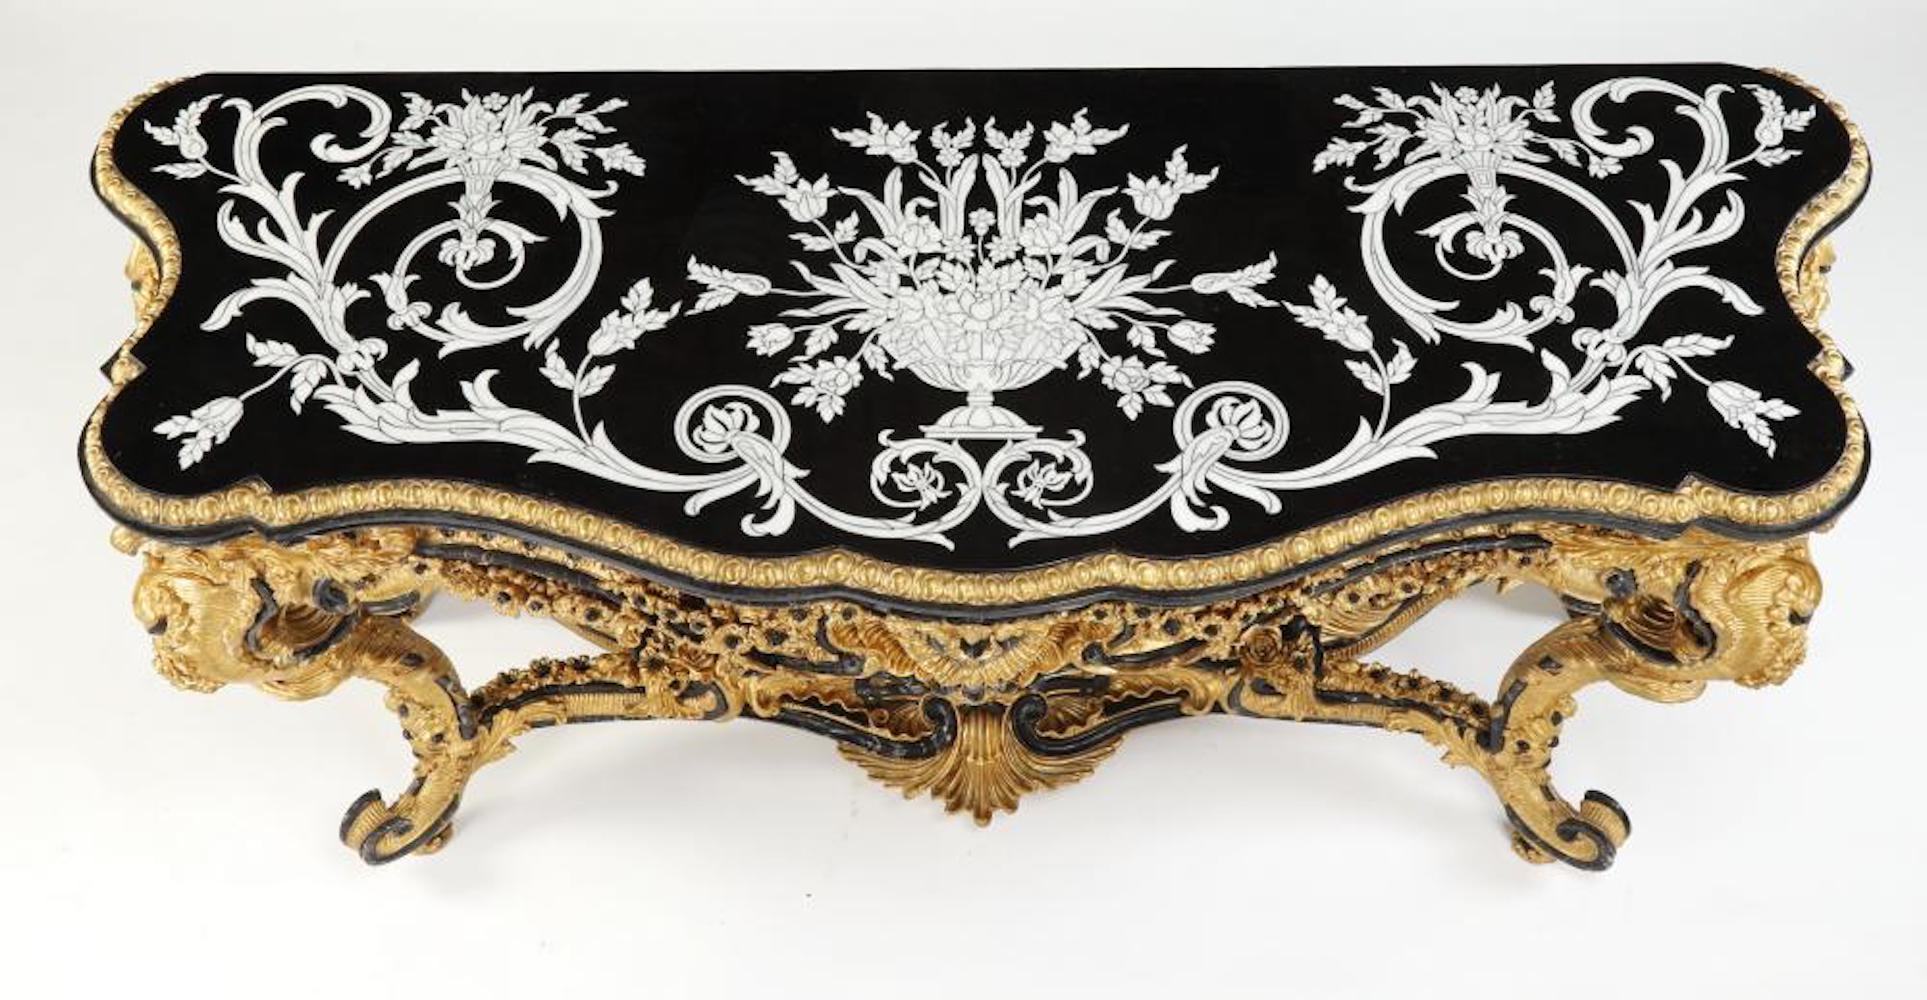 Carved Gilt Italian Rococo Style Marble-Top Console For Sale 3